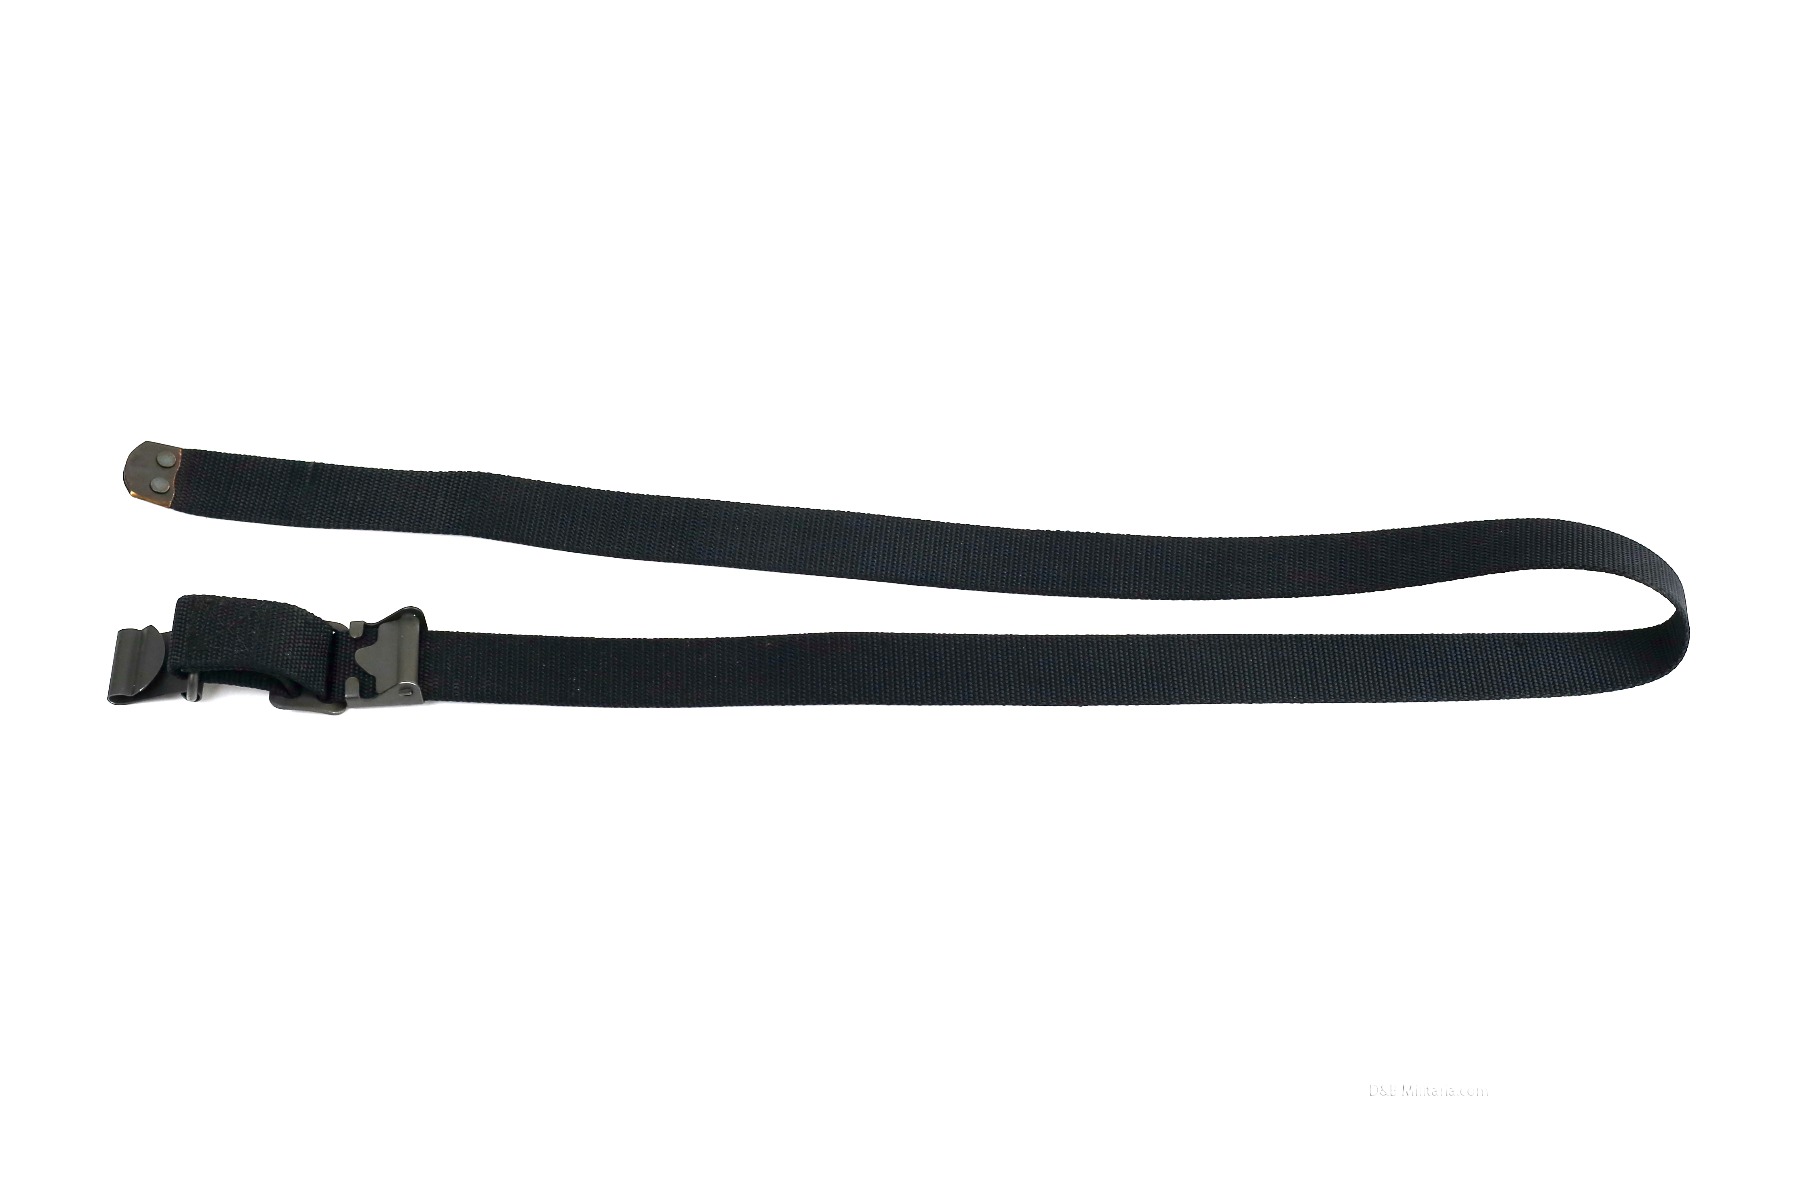 M4/M16 Tactical sling (1) (UOS)